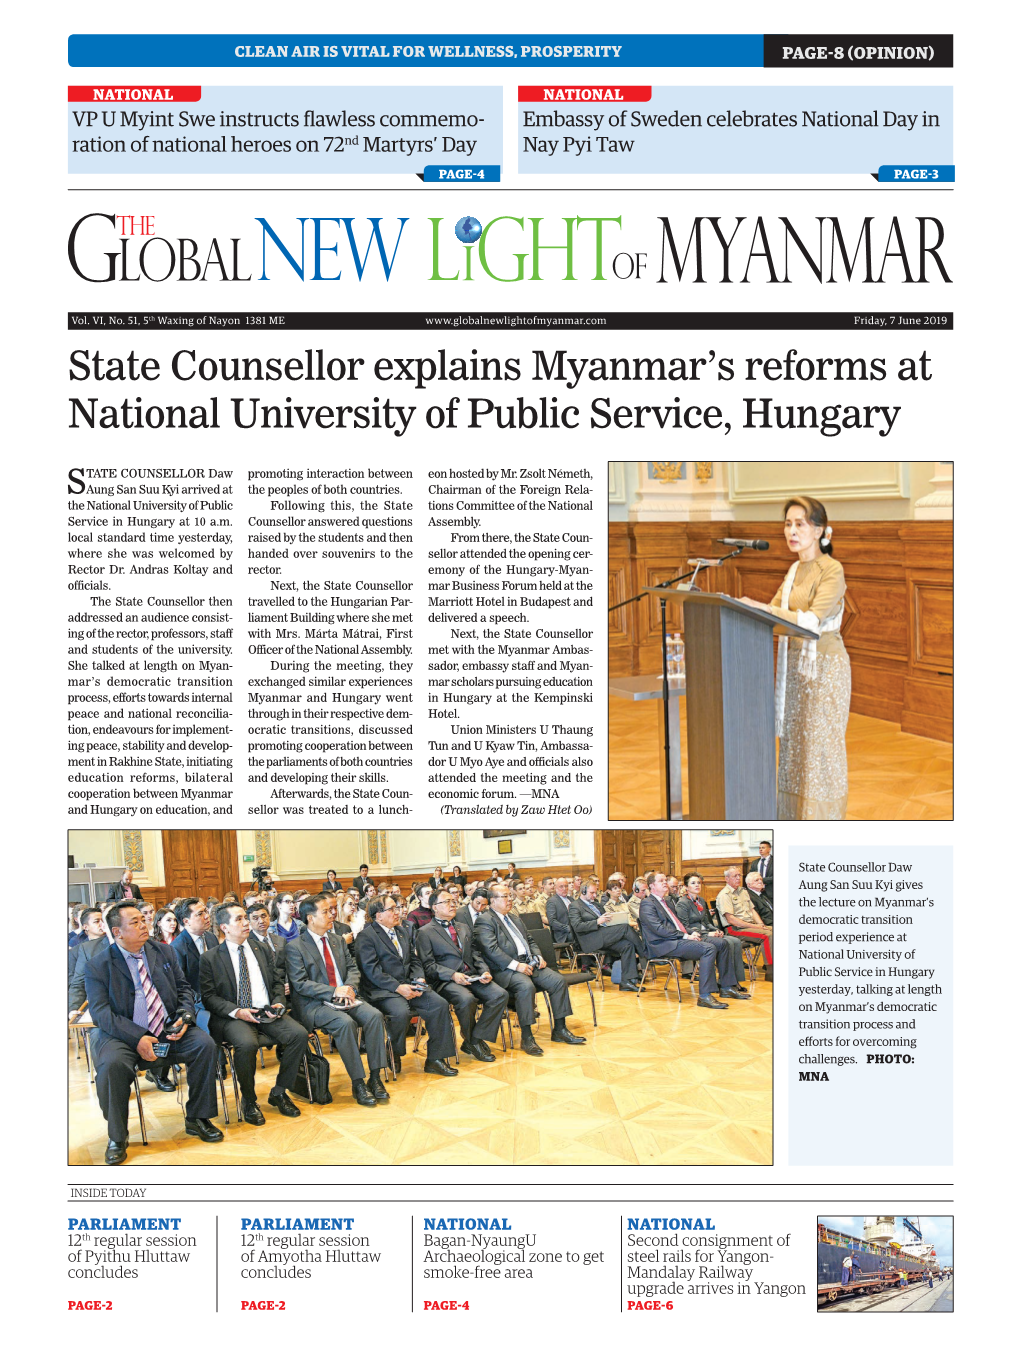 State Counsellor Explains Myanmar's Reforms at National University Of